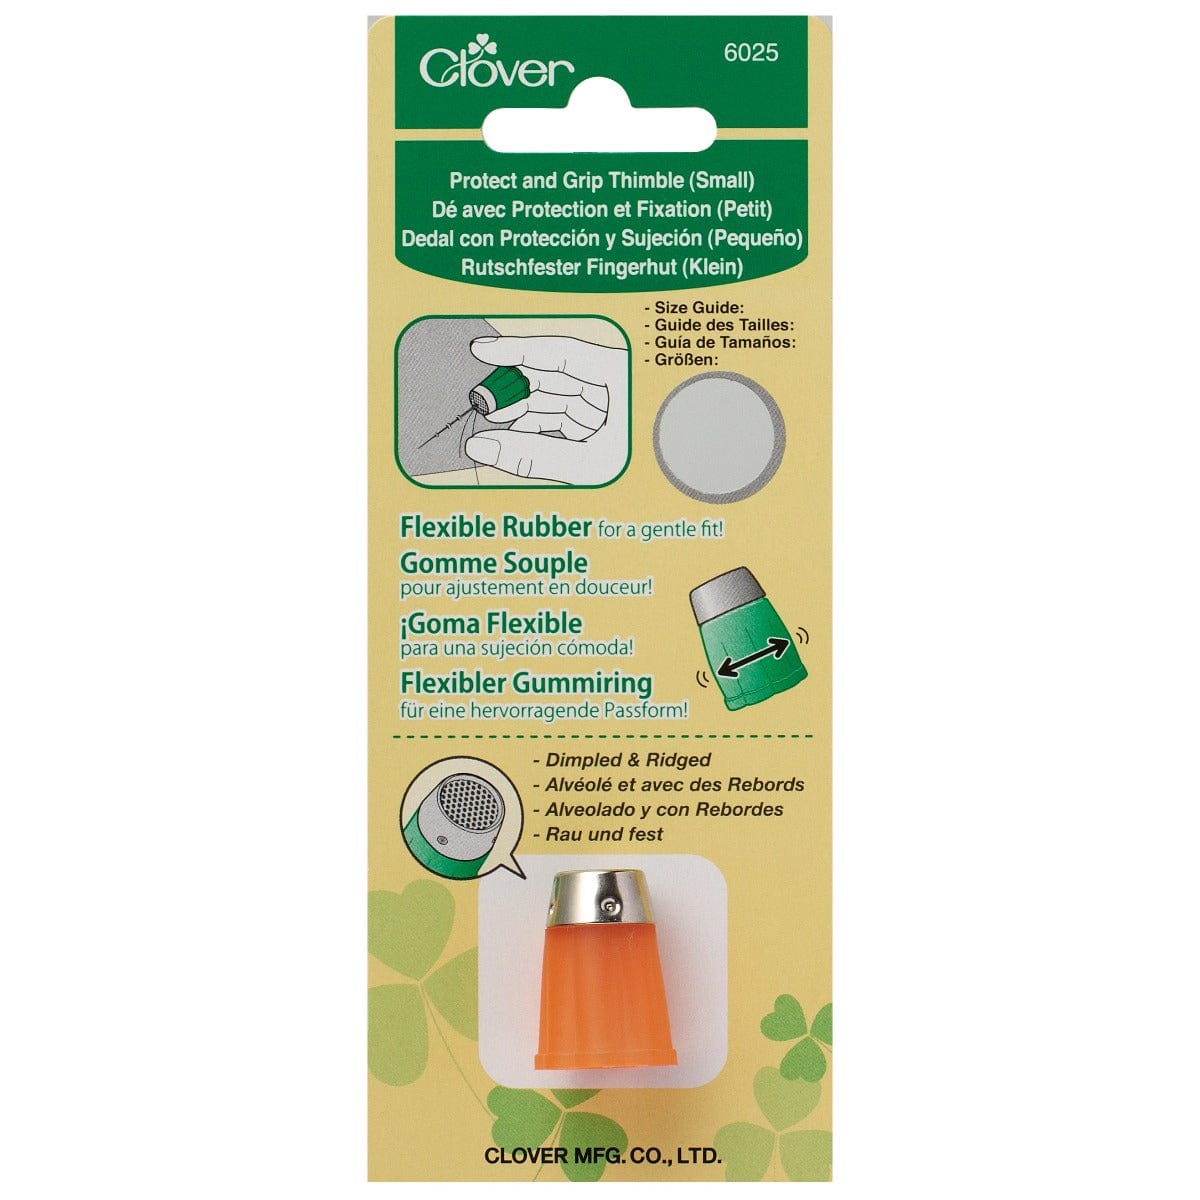 Clover Protect and Grip Thimble: Small